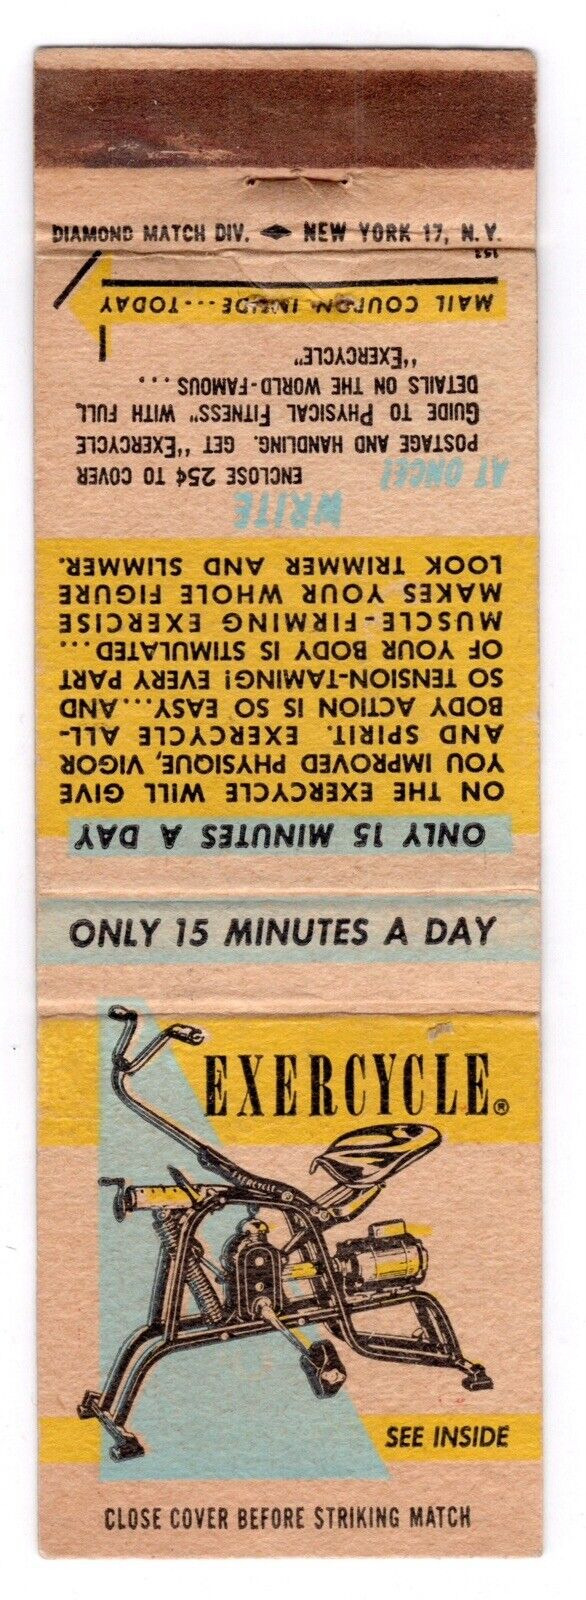 1950s Exercycle Bike Fitness Exercise Home Workout MCM Vintage Matchbook Cover